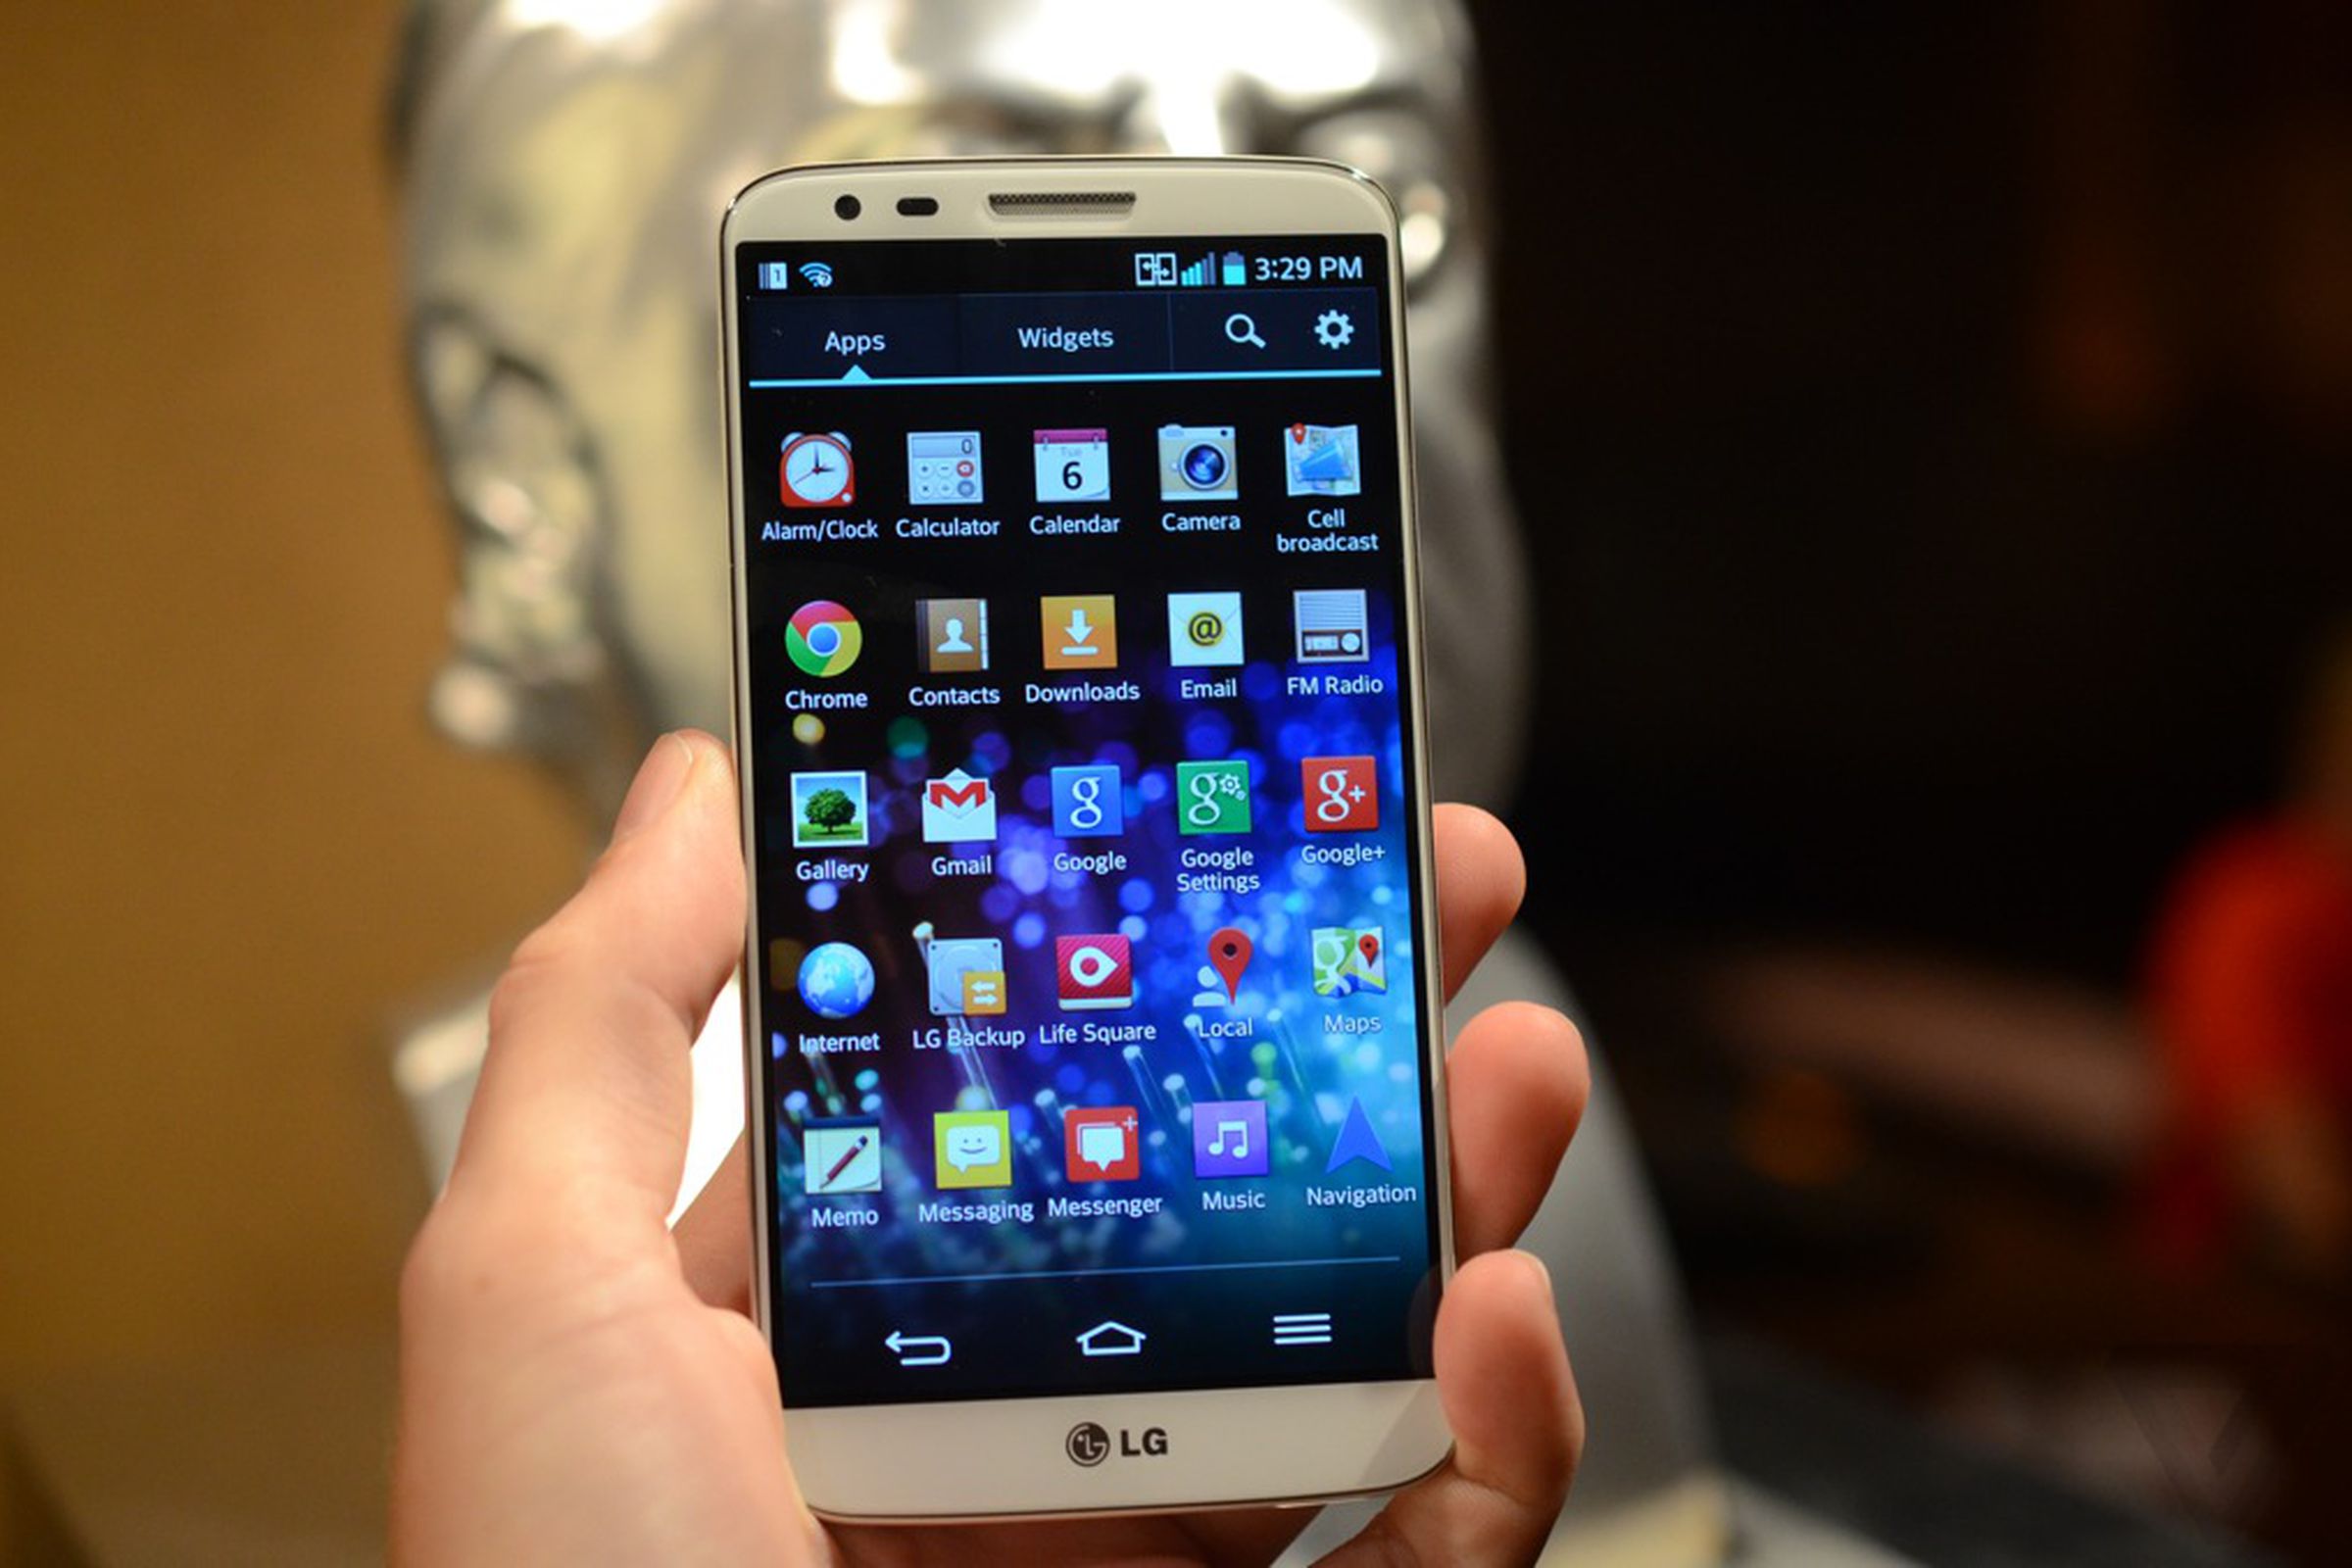 Gallery Photo: LG G2 hands-on pictures